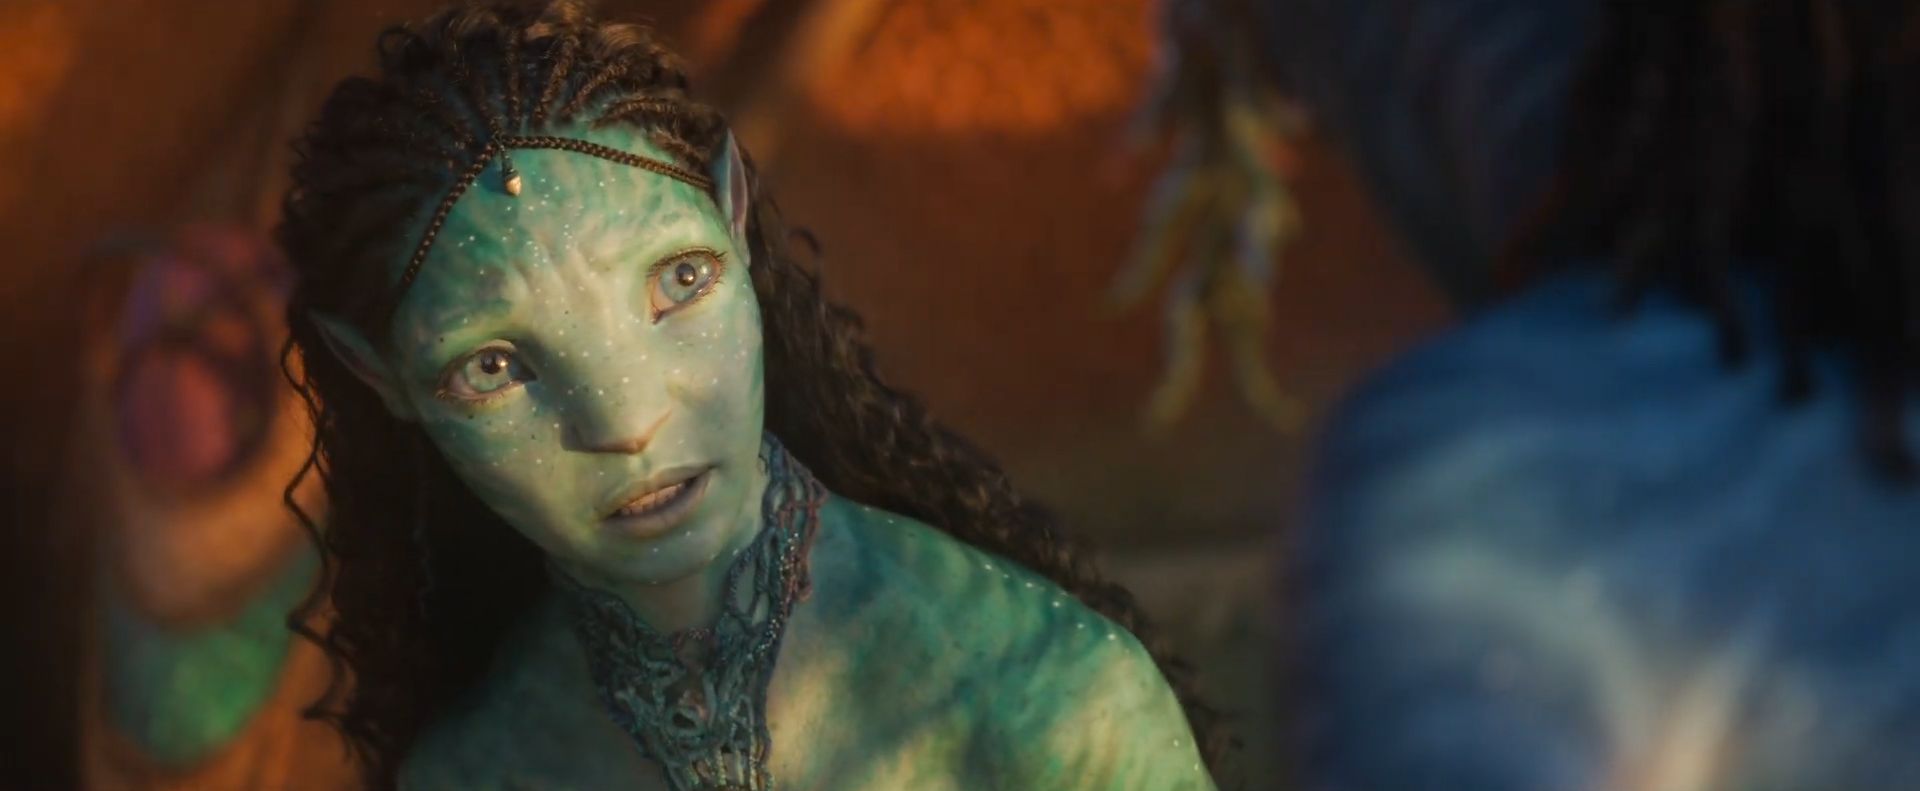 Avatar 2 release date, trailer and more about The Way of Water